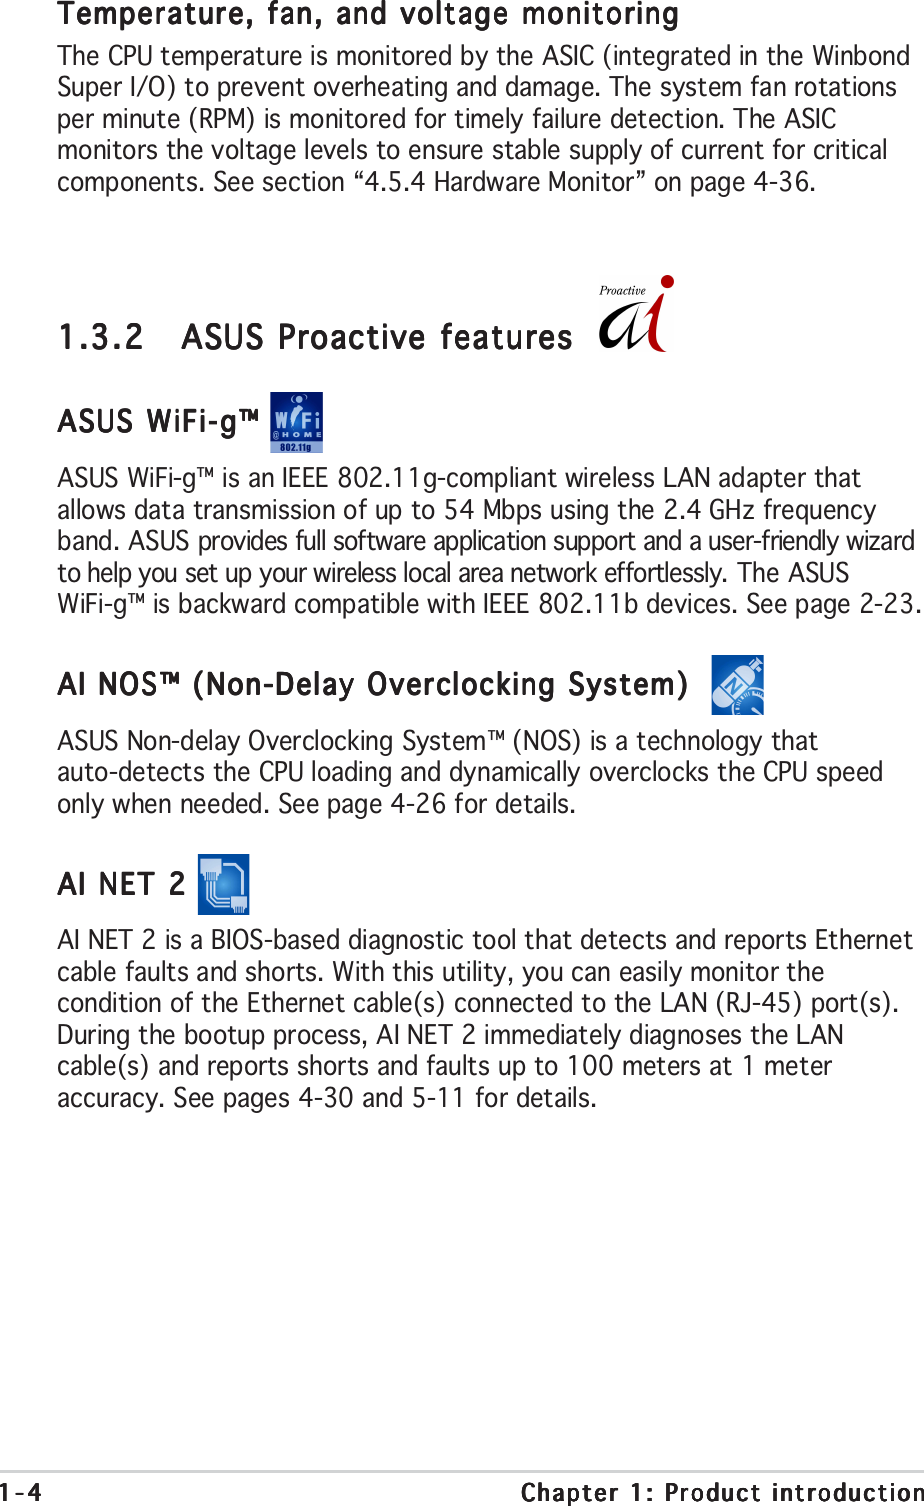 1-41-41-41-41-4 Chapter 1: Product introductionChapter 1: Product introductionChapter 1: Product introductionChapter 1: Product introductionChapter 1: Product introduction1.3.21.3.21.3.21.3.21.3.2 ASUS Proactive featuresASUS Proactive featuresASUS Proactive featuresASUS Proactive featuresASUS Proactive featuresASUS WiFi-g™ ASUS WiFi-g™ ASUS WiFi-g™ ASUS WiFi-g™ ASUS WiFi-g™ ASUS WiFi-g™ is an IEEE 802.11g-compliant wireless LAN adapter thatallows data transmission of up to 54 Mbps using the 2.4 GHz frequencyband. ASUS provides full software application support and a user-friendly wizardto help you set up your wireless local area network effortlessly. The ASUSWiFi-g™ is backward compatible with IEEE 802.11b devices. See page 2-23.AI NOS™ (Non-Delay Overclocking System)  AI NOS™ (Non-Delay Overclocking System)  AI NOS™ (Non-Delay Overclocking System)  AI NOS™ (Non-Delay Overclocking System)  AI NOS™ (Non-Delay Overclocking System)  ASUS Non-delay Overclocking System™ (NOS) is a technology thatauto-detects the CPU loading and dynamically overclocks the CPU speedonly when needed. See page 4-26 for details.AI NET 2 AI NET 2 AI NET 2 AI NET 2 AI NET 2 AI NET 2 is a BIOS-based diagnostic tool that detects and reports Ethernetcable faults and shorts. With this utility, you can easily monitor thecondition of the Ethernet cable(s) connected to the LAN (RJ-45) port(s).During the bootup process, AI NET 2 immediately diagnoses the LANcable(s) and reports shorts and faults up to 100 meters at 1 meteraccuracy. See pages 4-30 and 5-11 for details.Temperature, fan, and voltage monitoringTemperature, fan, and voltage monitoringTemperature, fan, and voltage monitoringTemperature, fan, and voltage monitoringTemperature, fan, and voltage monitoringThe CPU temperature is monitored by the ASIC (integrated in the WinbondSuper I/O) to prevent overheating and damage. The system fan rotationsper minute (RPM) is monitored for timely failure detection. The ASICmonitors the voltage levels to ensure stable supply of current for criticalcomponents. See section “4.5.4 Hardware Monitor” on page 4-36.